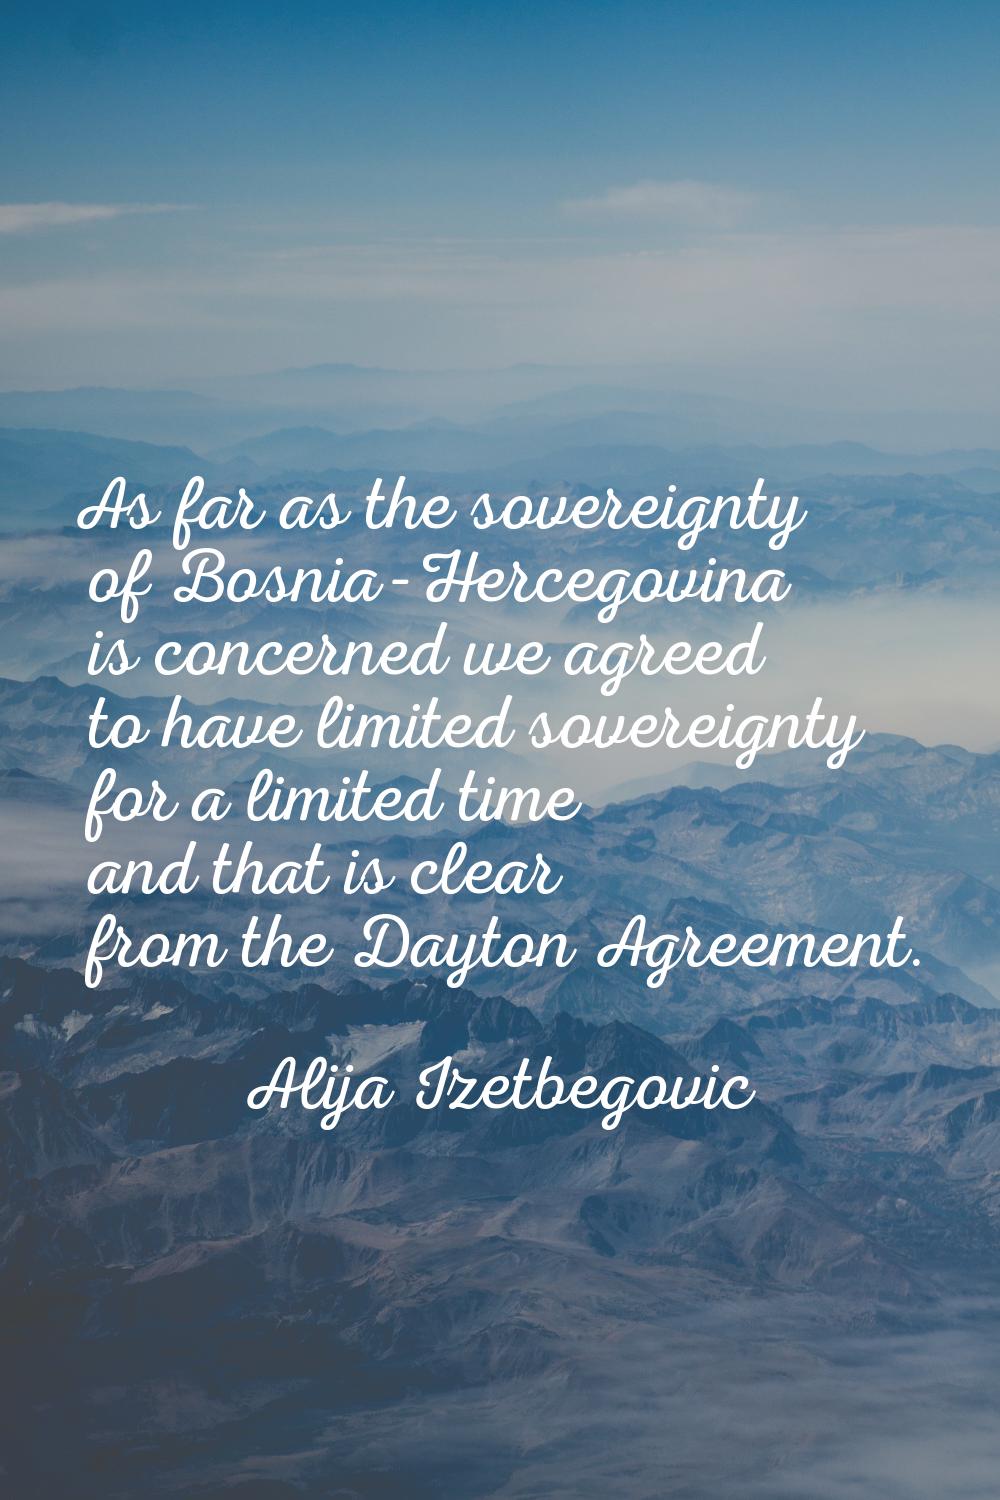 As far as the sovereignty of Bosnia-Hercegovina is concerned we agreed to have limited sovereignty 